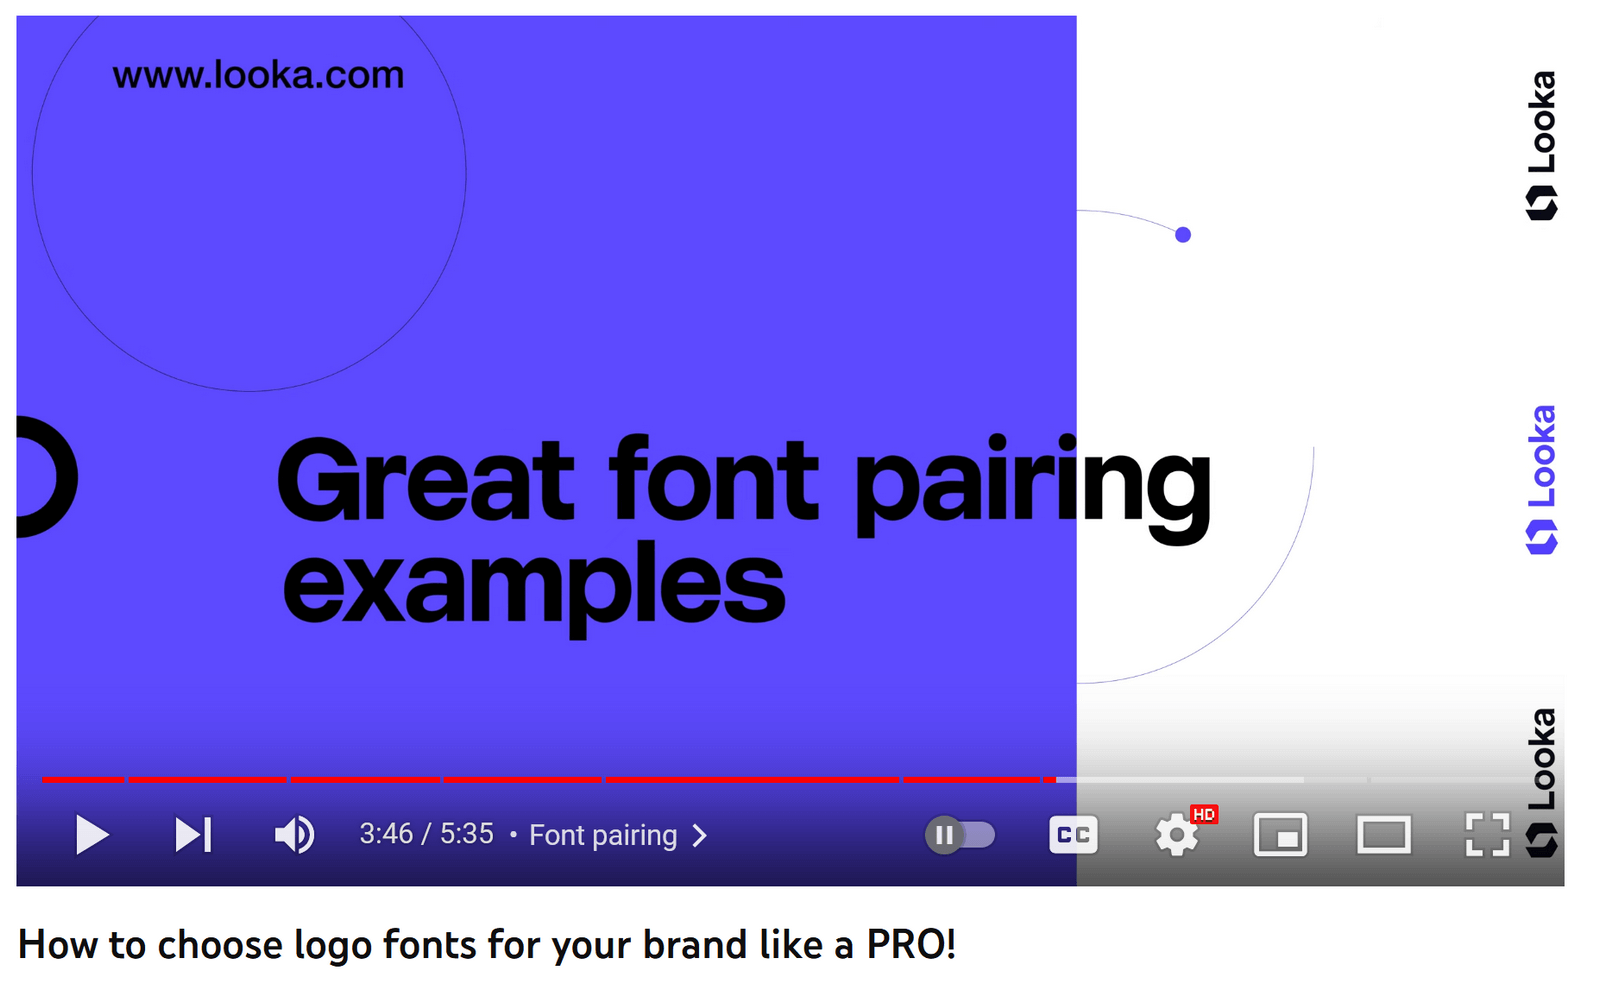 screenshot of "How to choose logo fonts for your brand like a PRO!" YouTube video by Looka